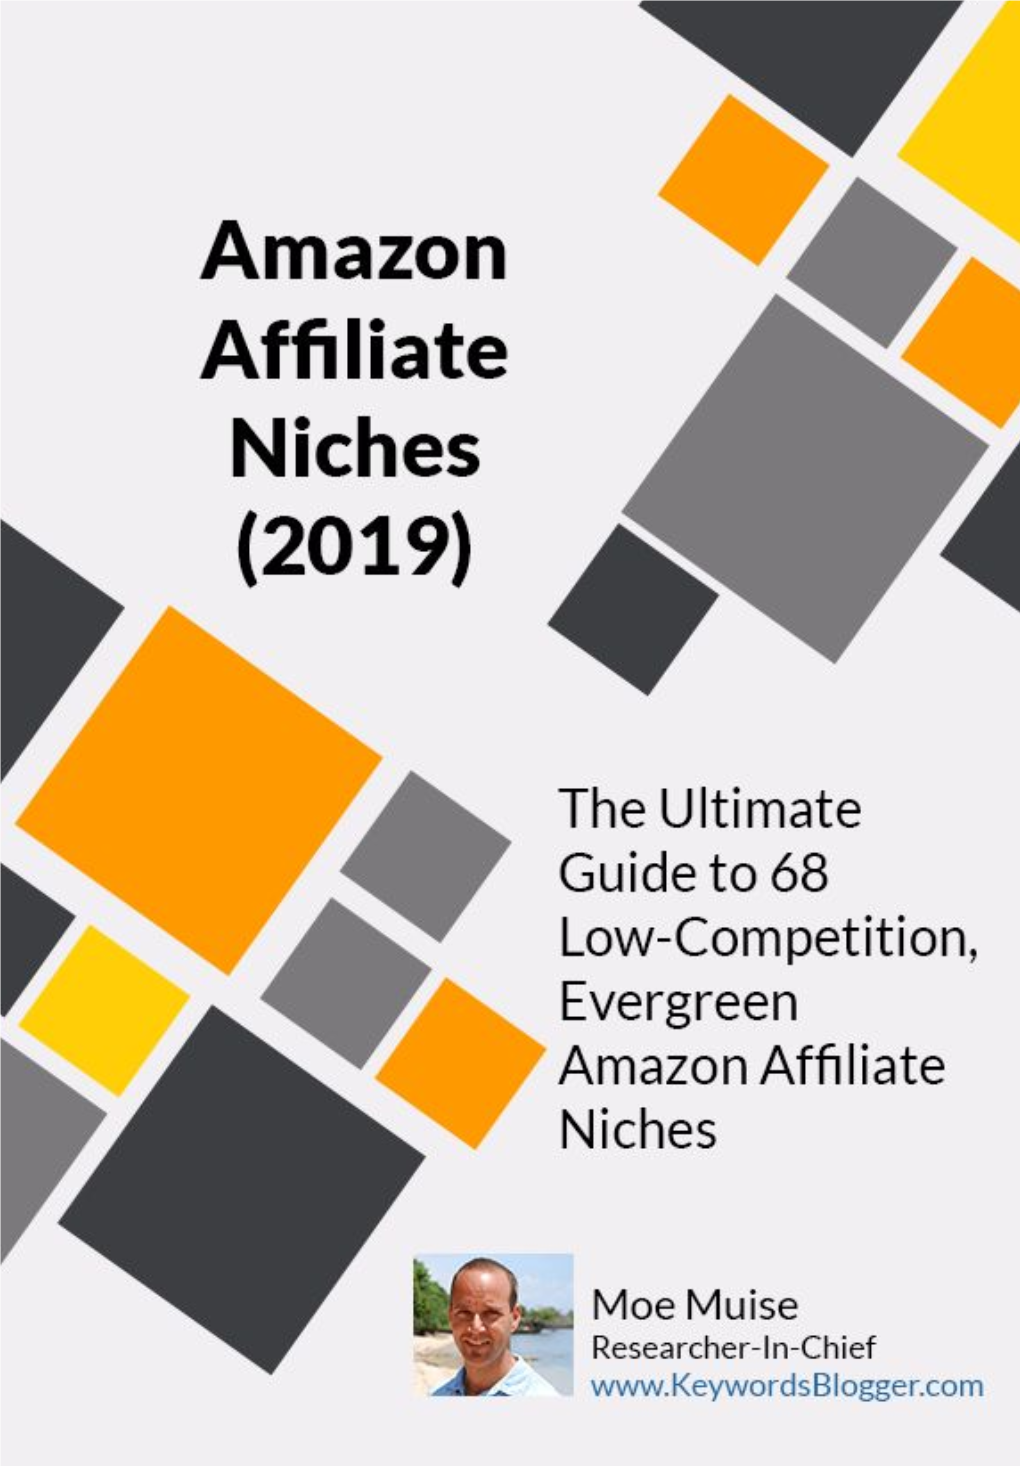 Amazon Affiliate Niches (2019) the Ultimate Guide to 68 Low-Competition, Evergreen Amazon Affiliate Niches OBLIGATORY DISCLAIMER